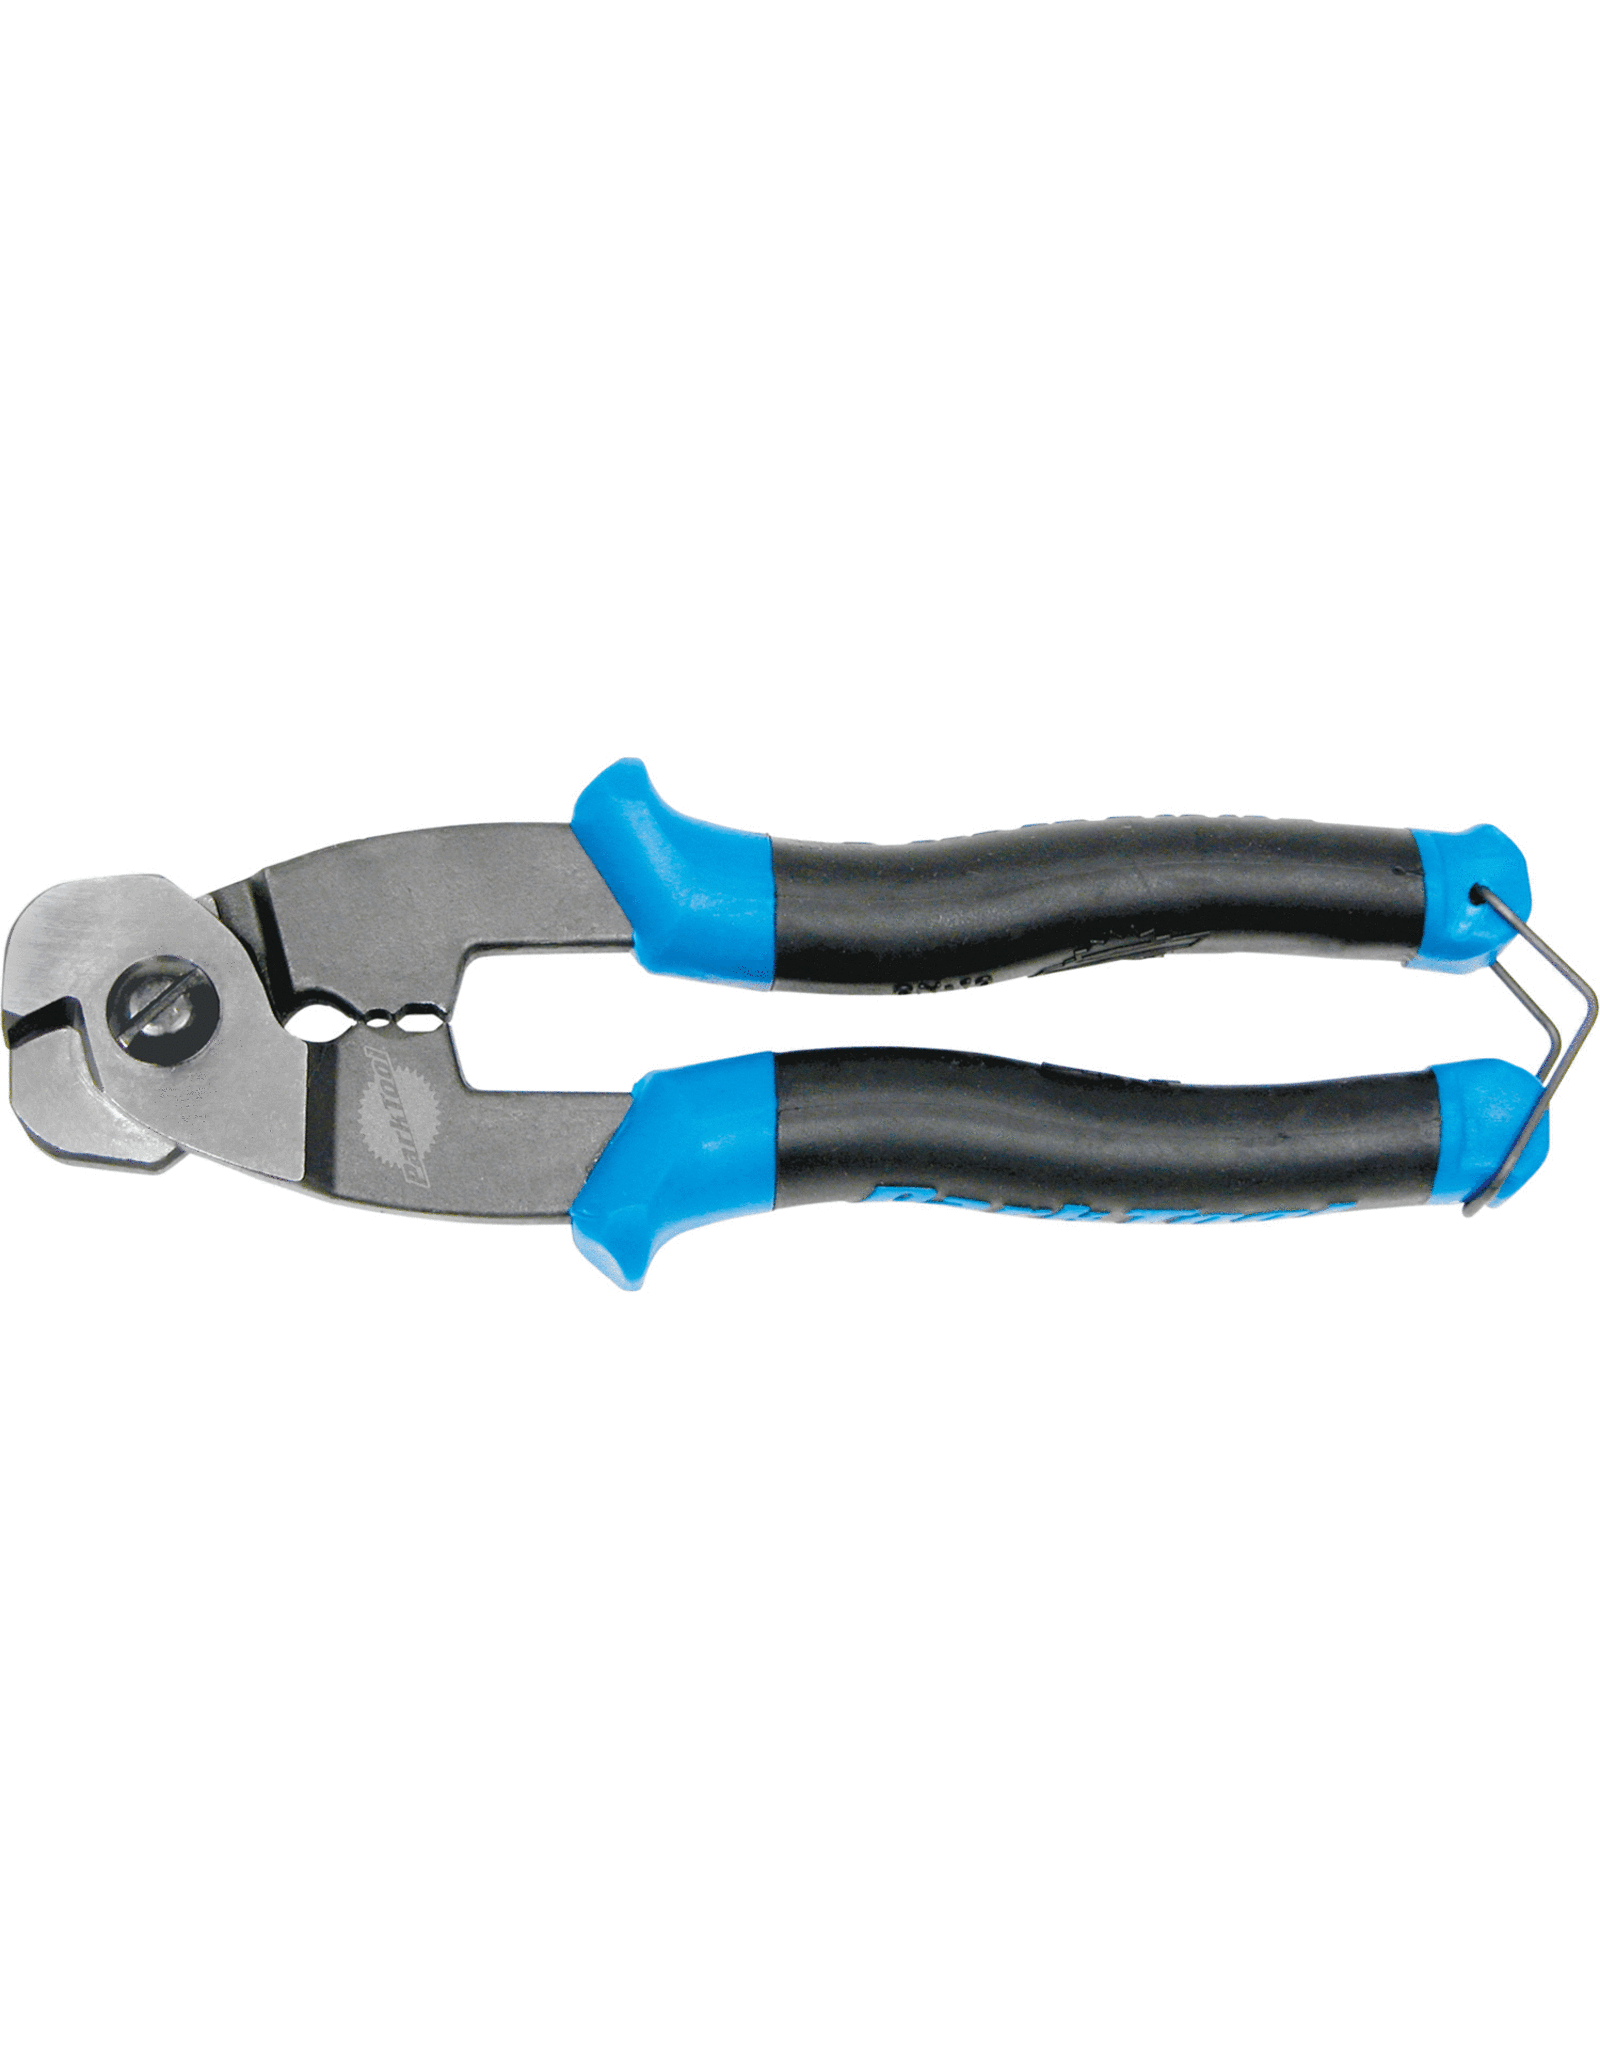 Park Tool Park Tool CN-10 Shop Quality Cable & Housing Cutters